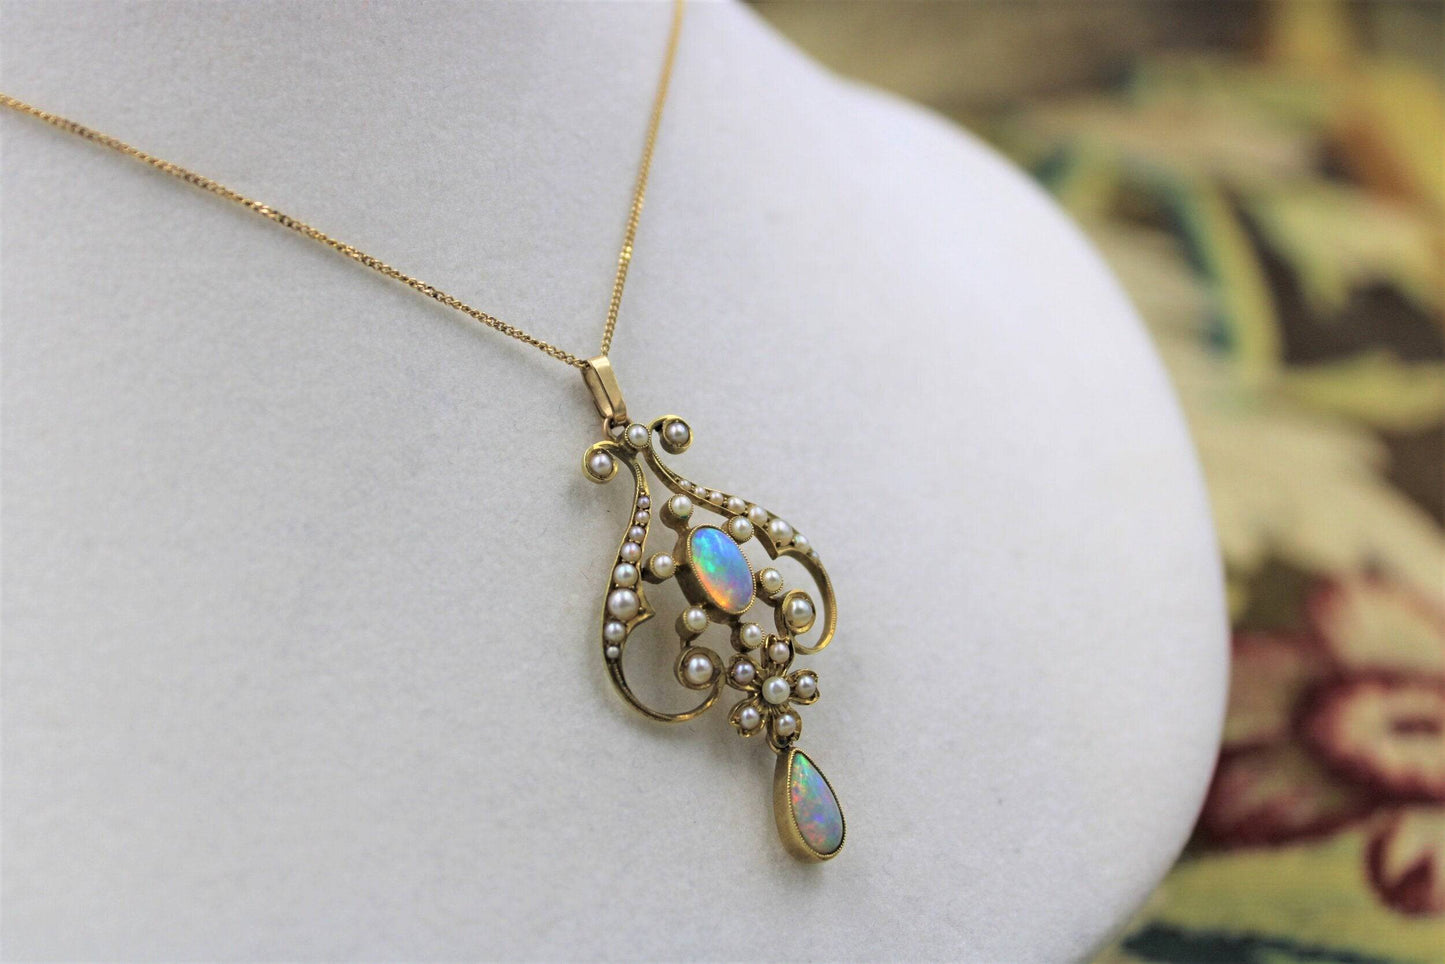 A very fine Art Nouveau Opal & Seed Pearl, Lavaliere Pendant set in 15ct Yellow Gold on a 9ct Gold Chain, English, Circa 1910 - Robin Haydock Antiques